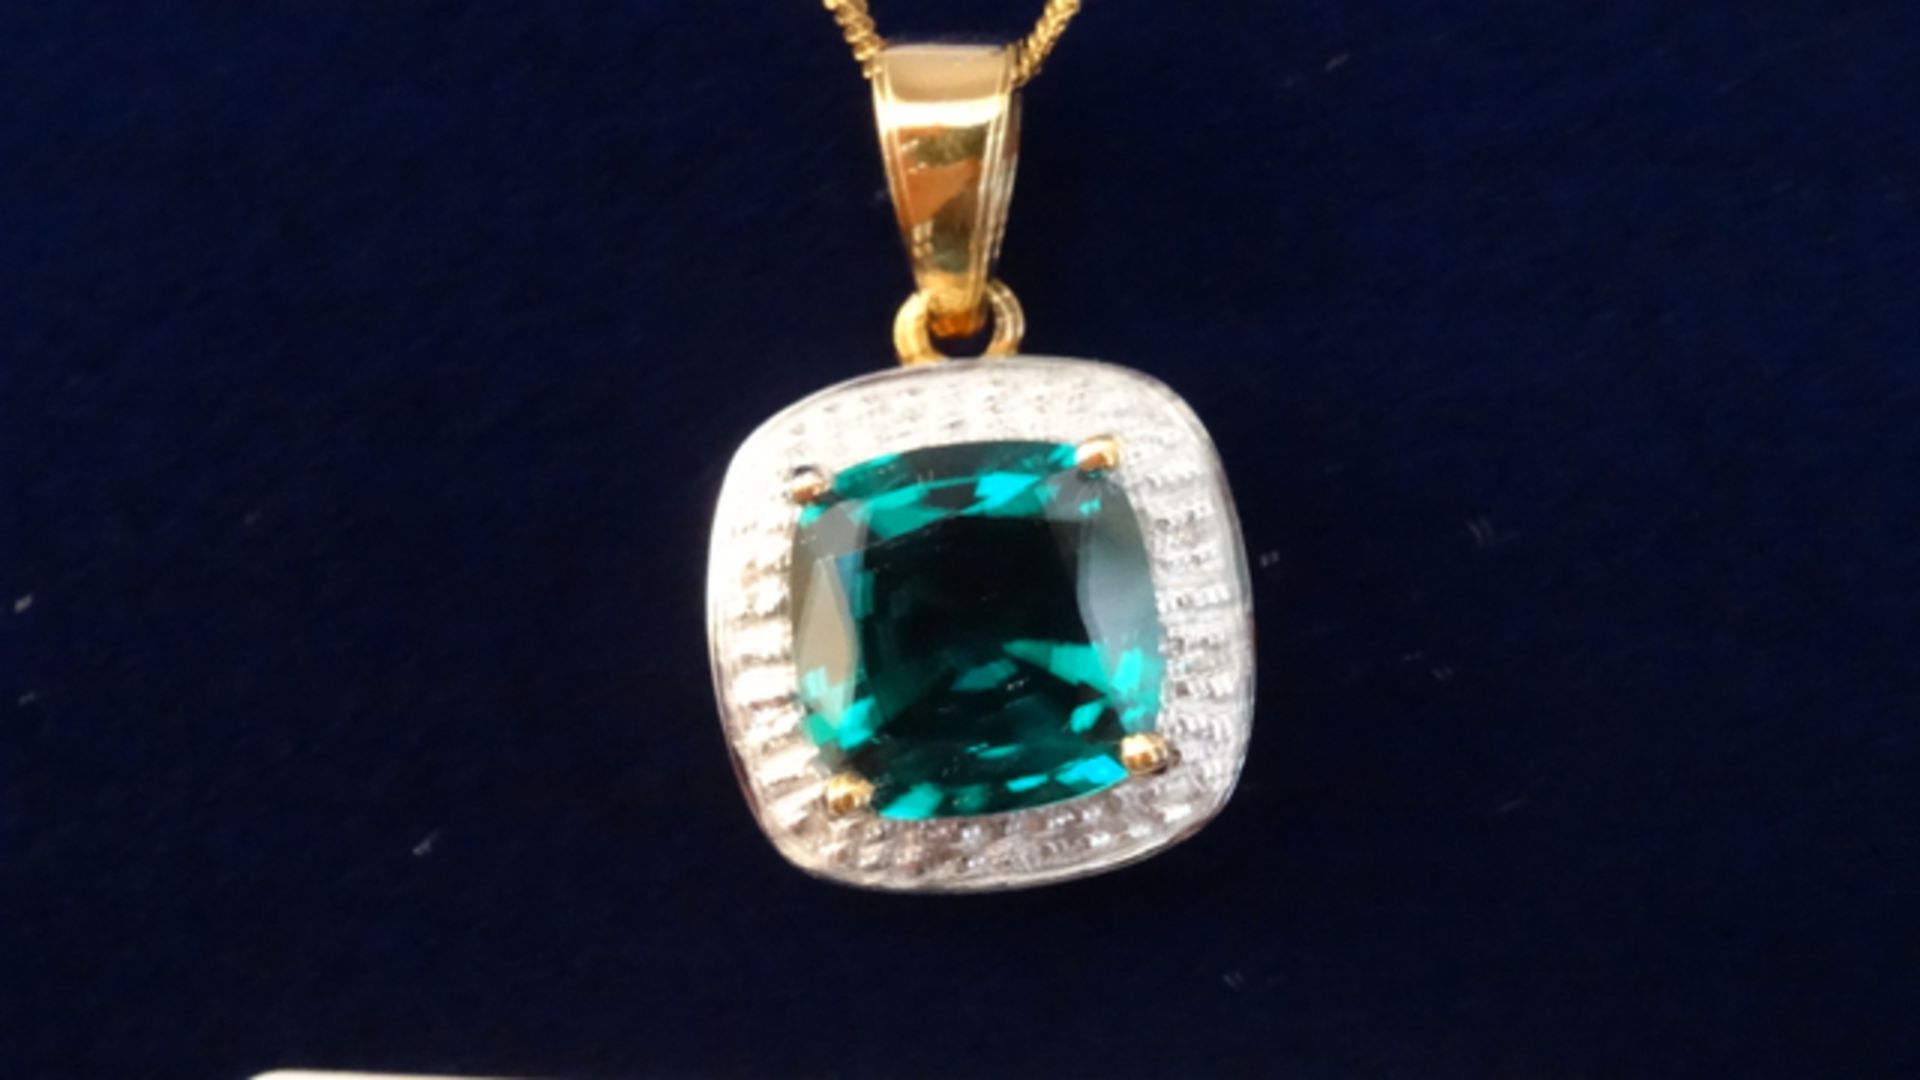 9ct Yellow Gold Chain with Emerald & Diamond Pendant. Beautiful piece, treat your loved one. - Image 3 of 3